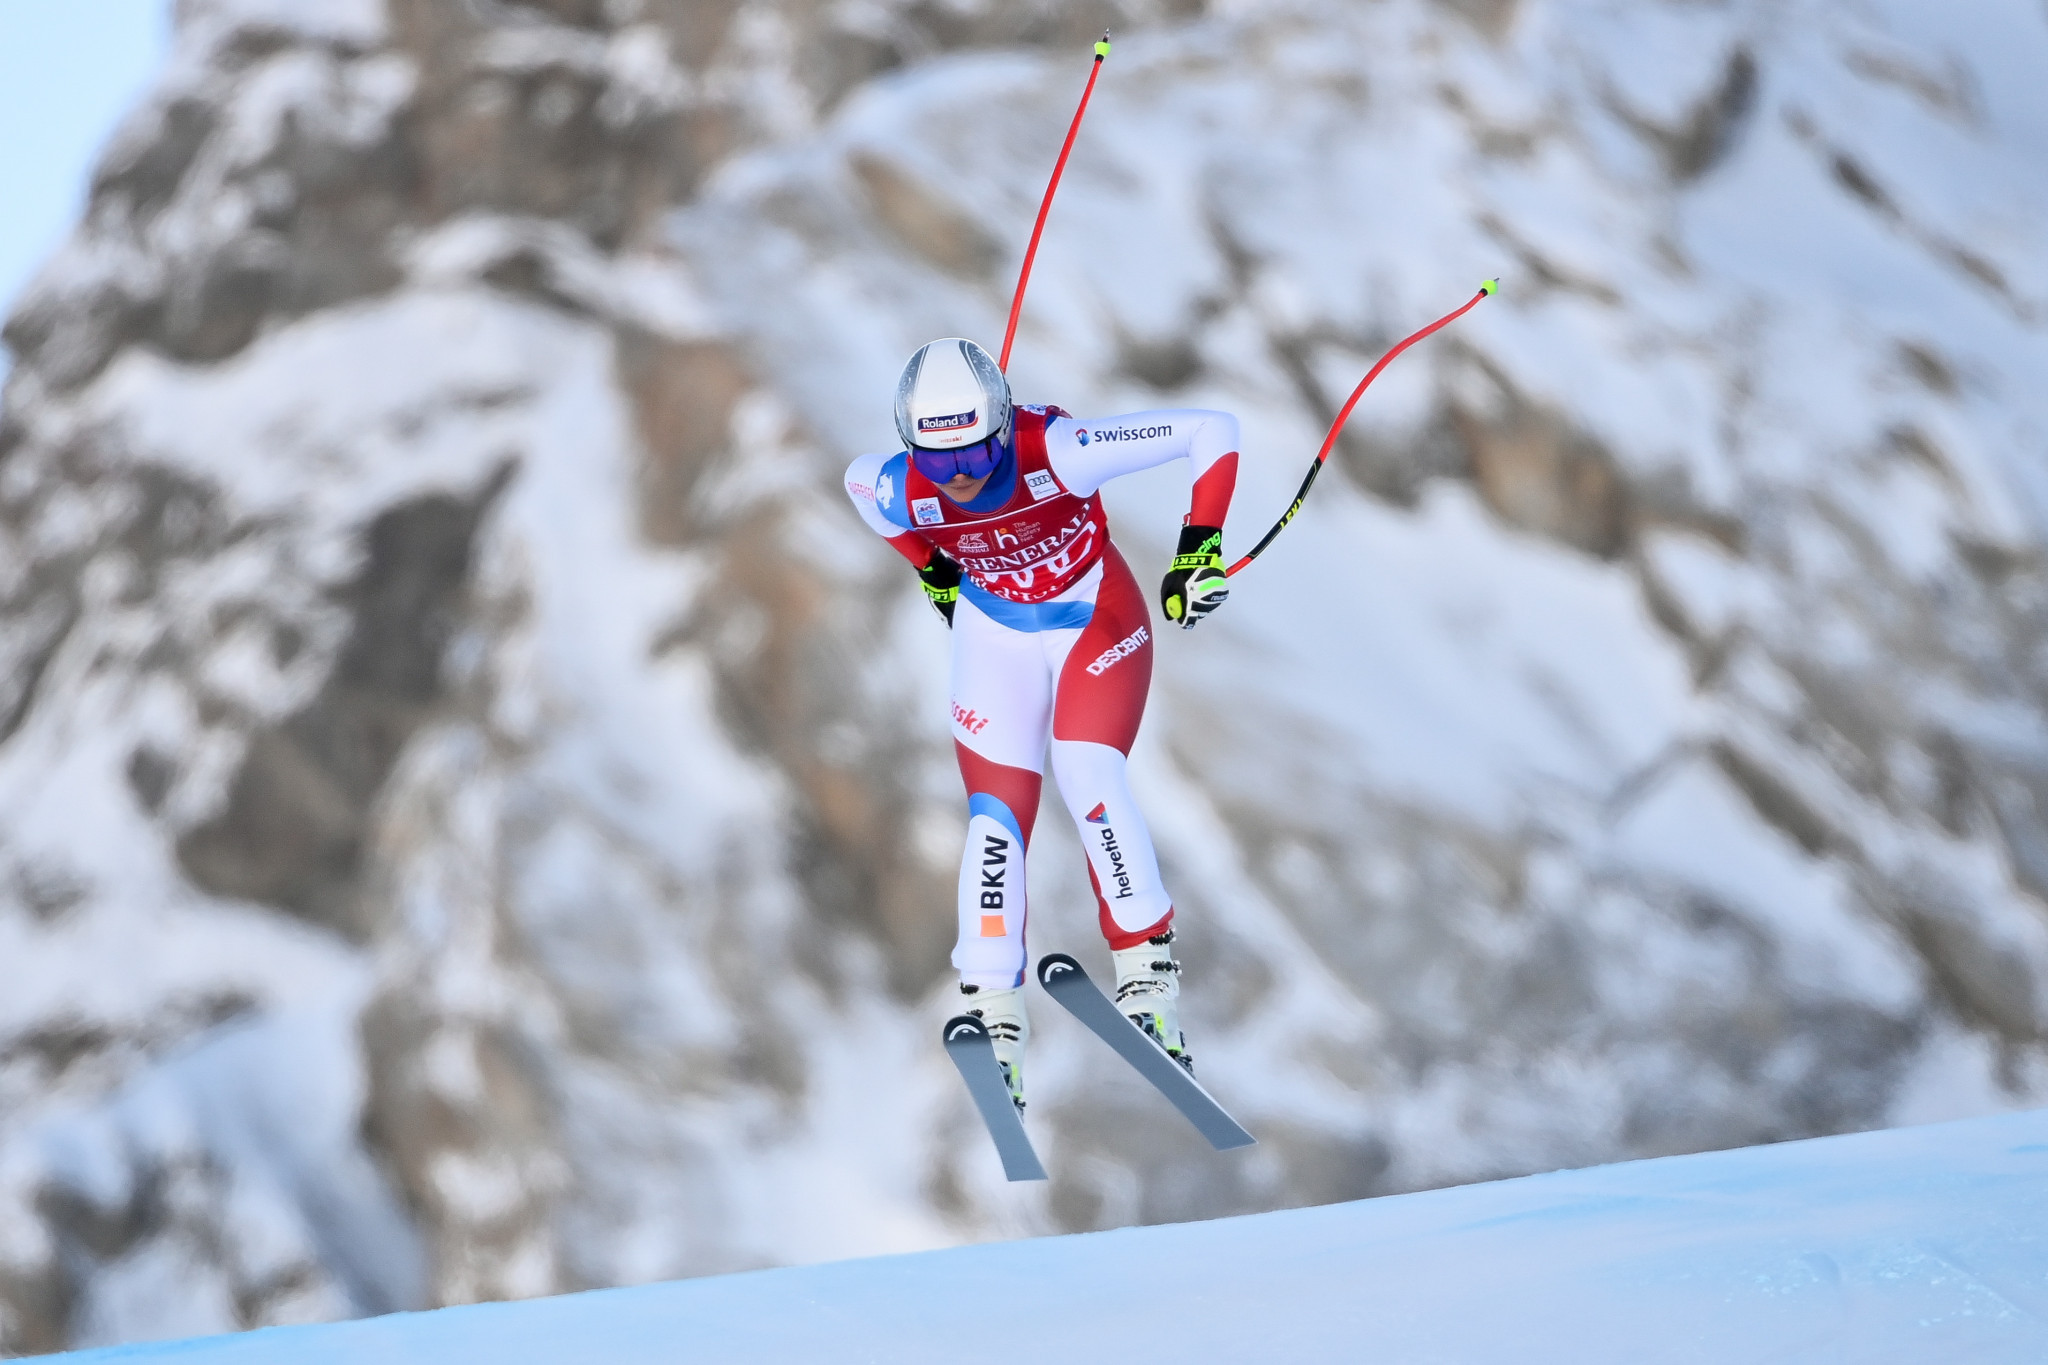 Reigning champion Suter wins first women's downhill race of World Cup season